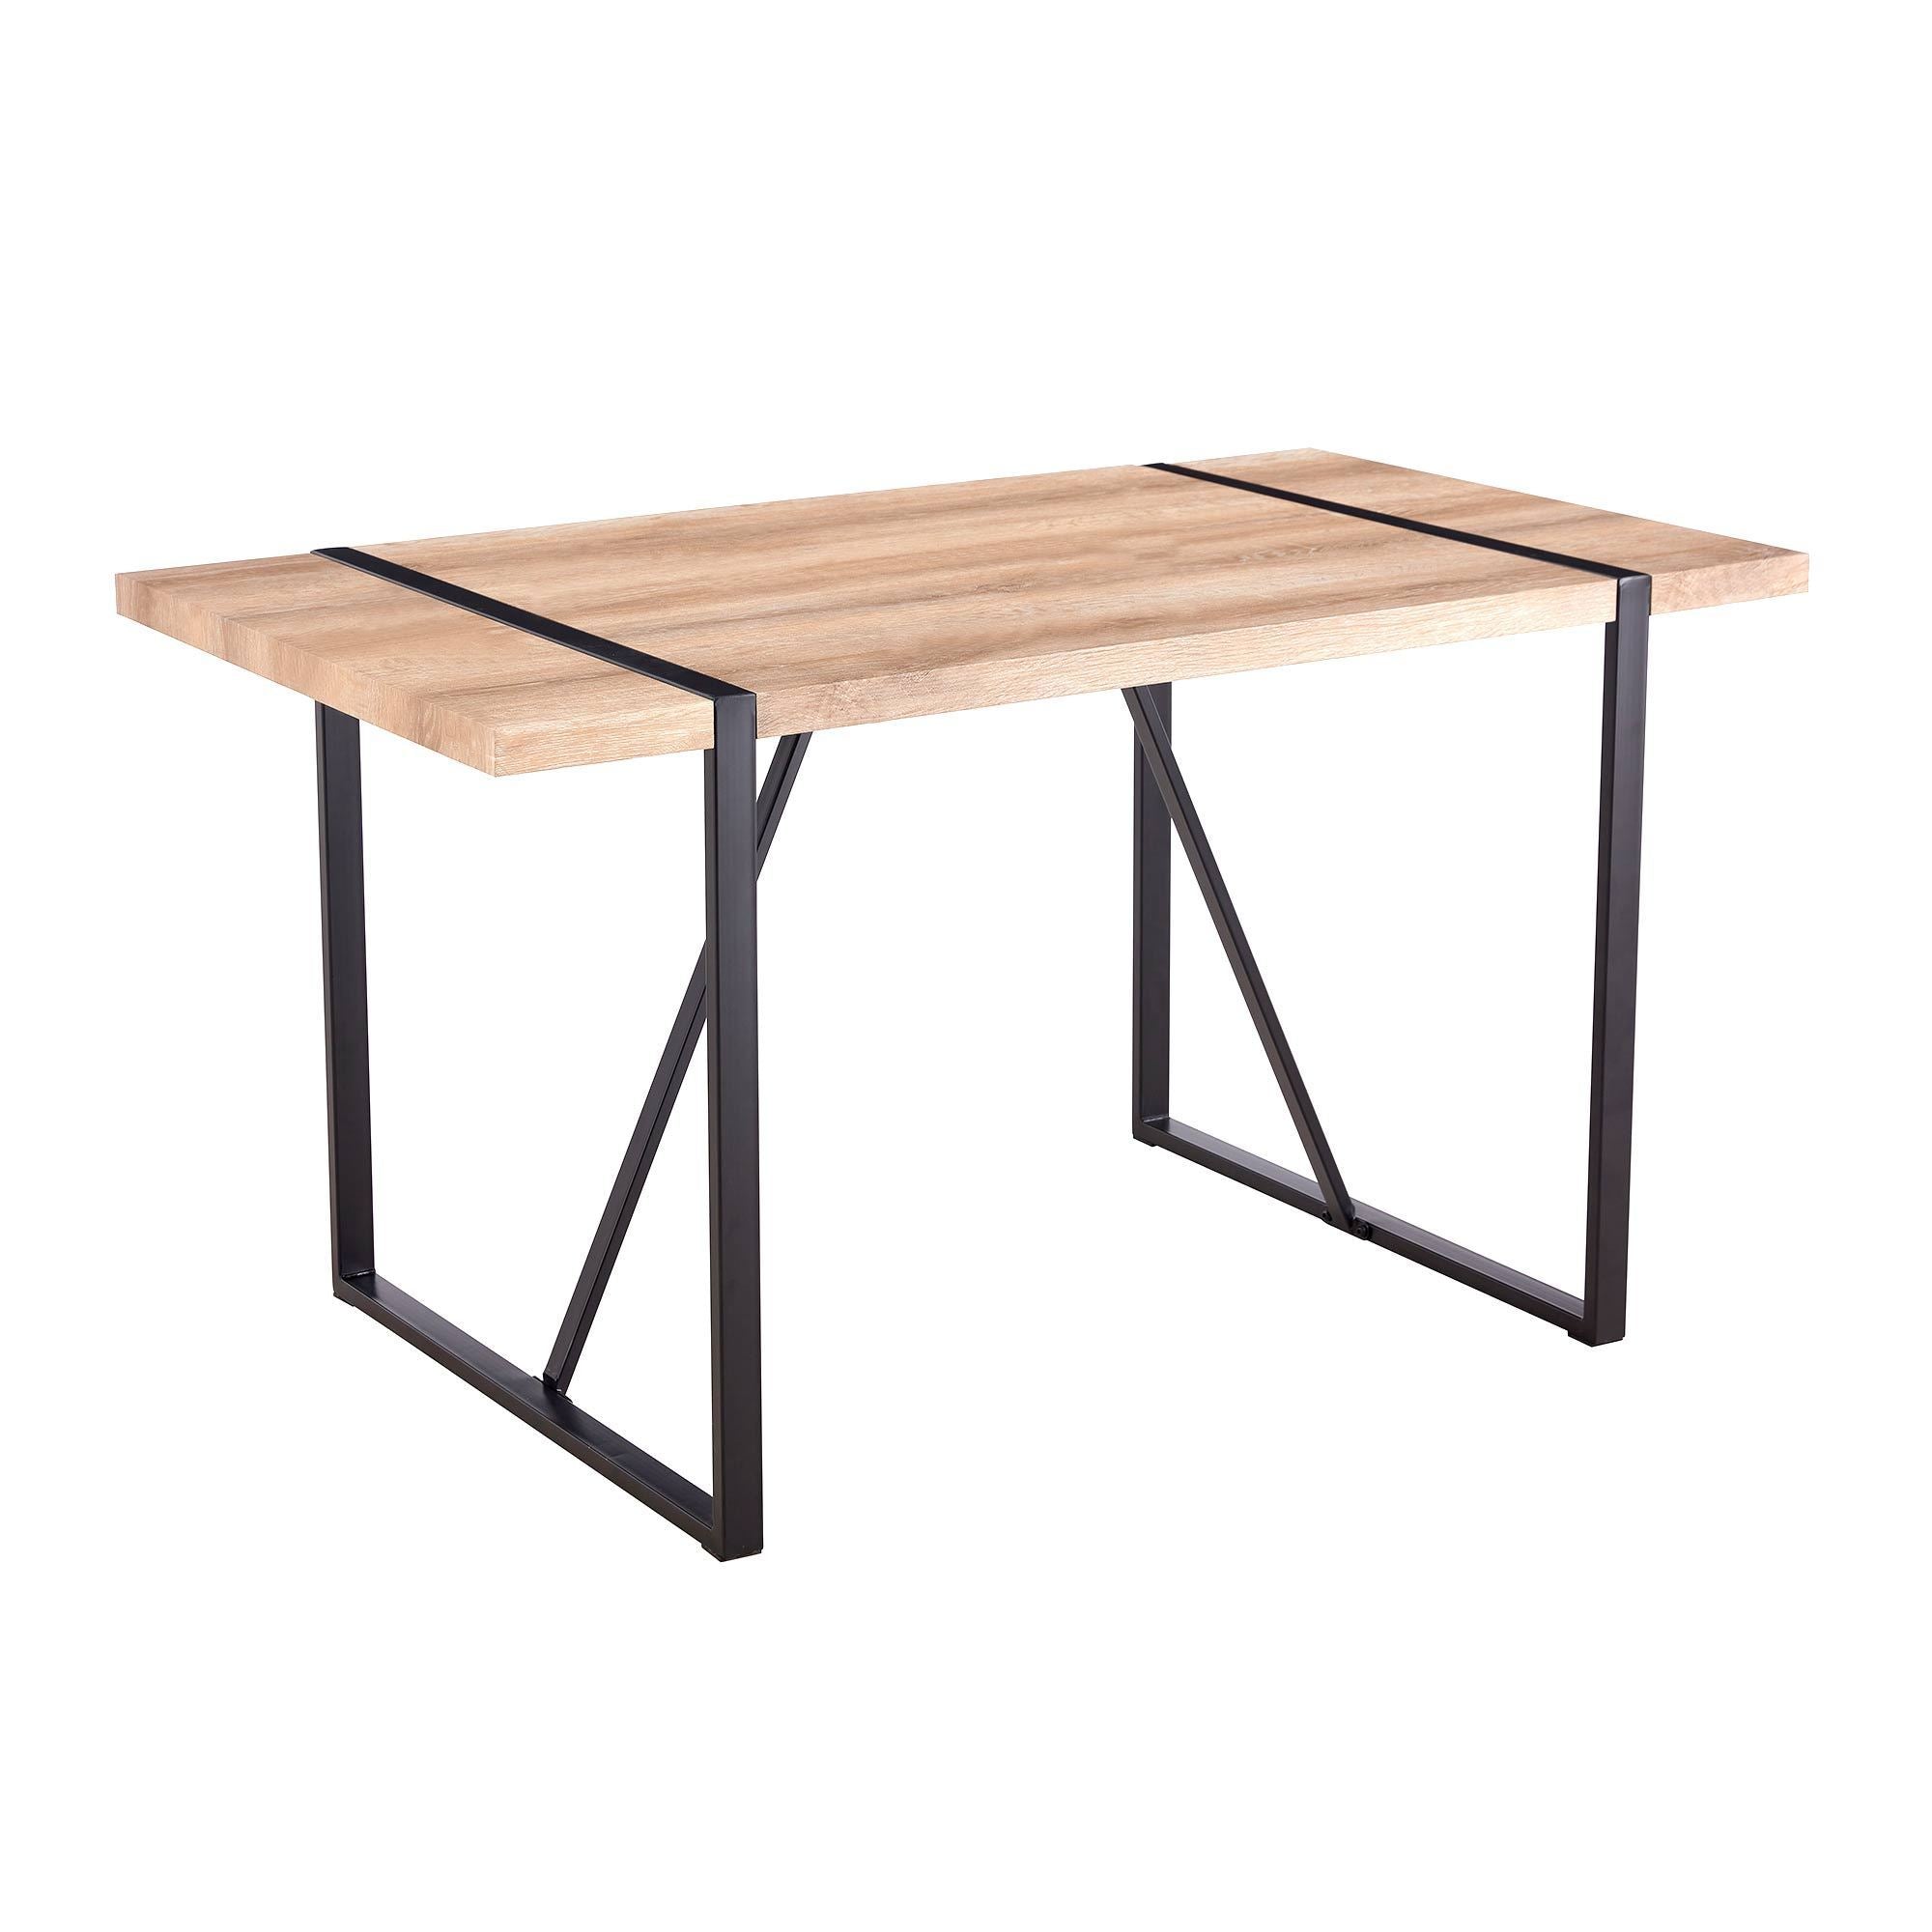 Rustic Industrial Rectangular Wood Dining Table For 4-6 Person, With 1.5" Thick Engineered Wood Tabletop and Black Metal Legs - Rustic Brown